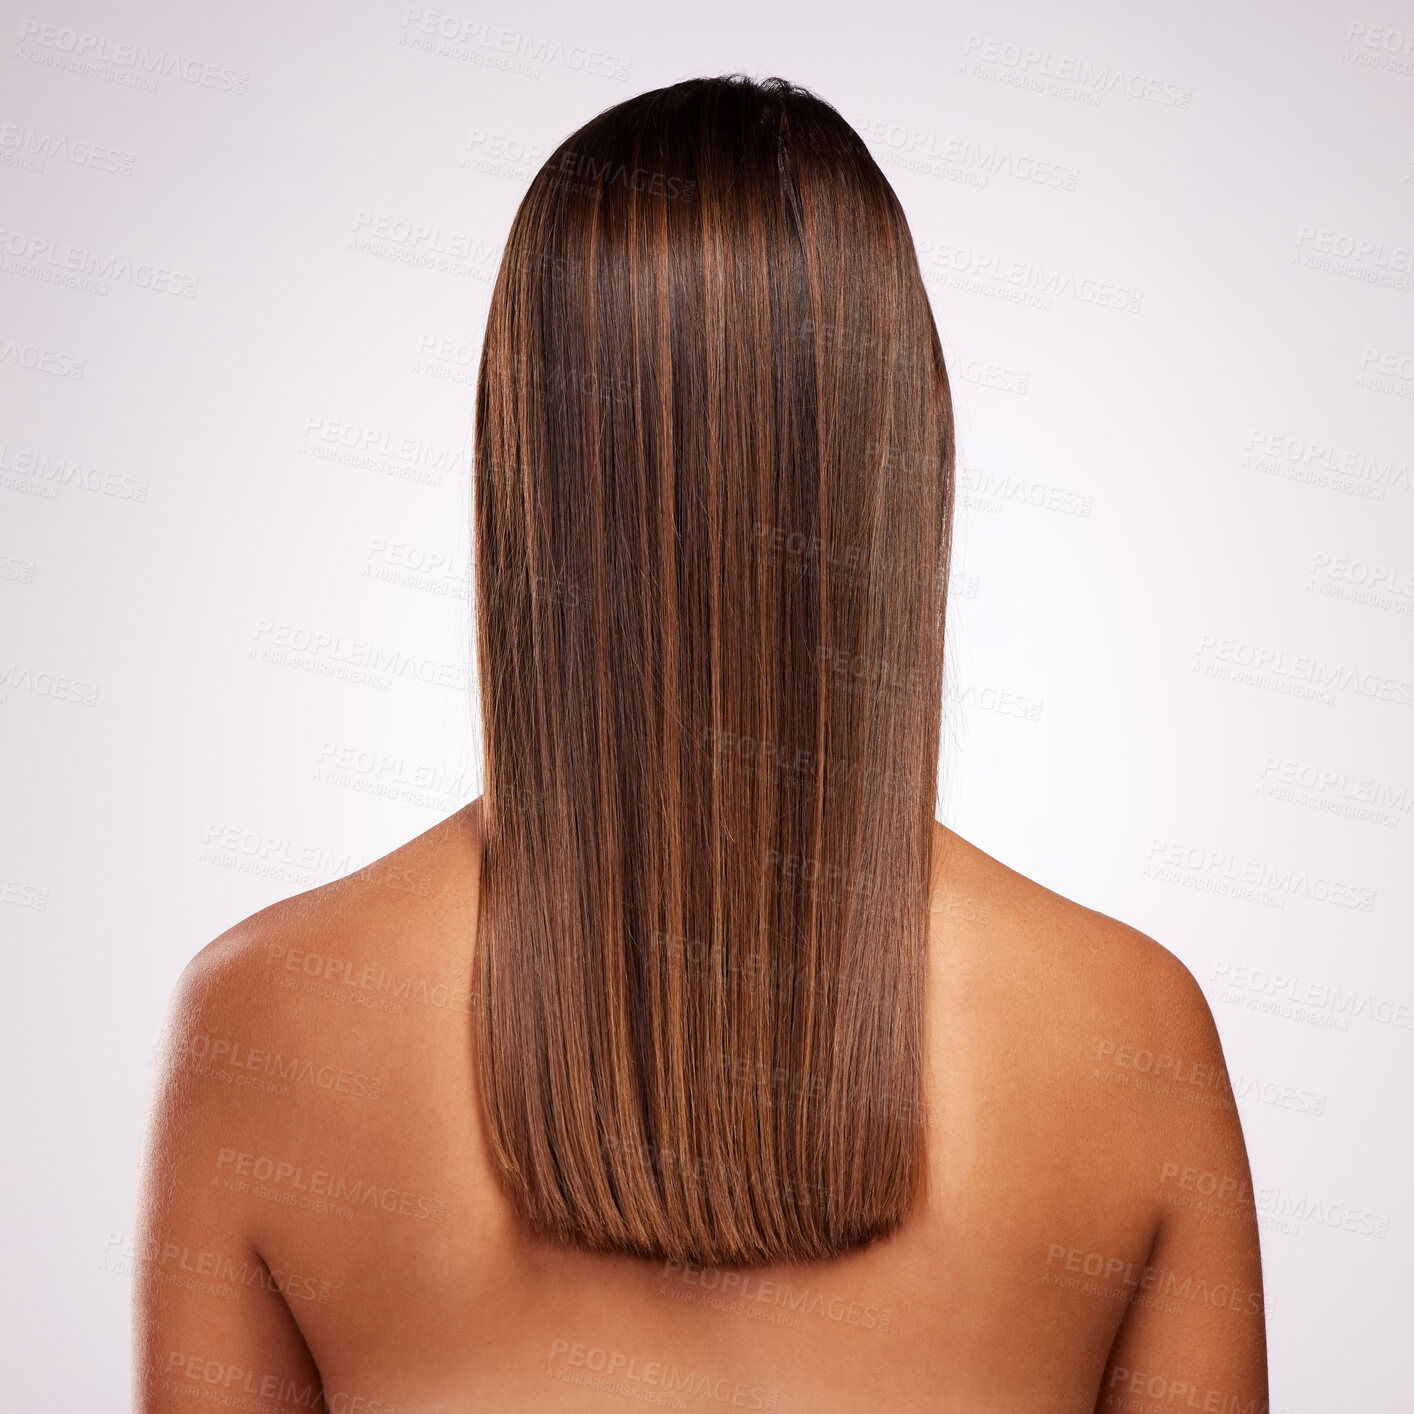 Buy stock photo Studio shot of an unrecognizable young woman standing with her back facing the camera to show off her hair against a grey background